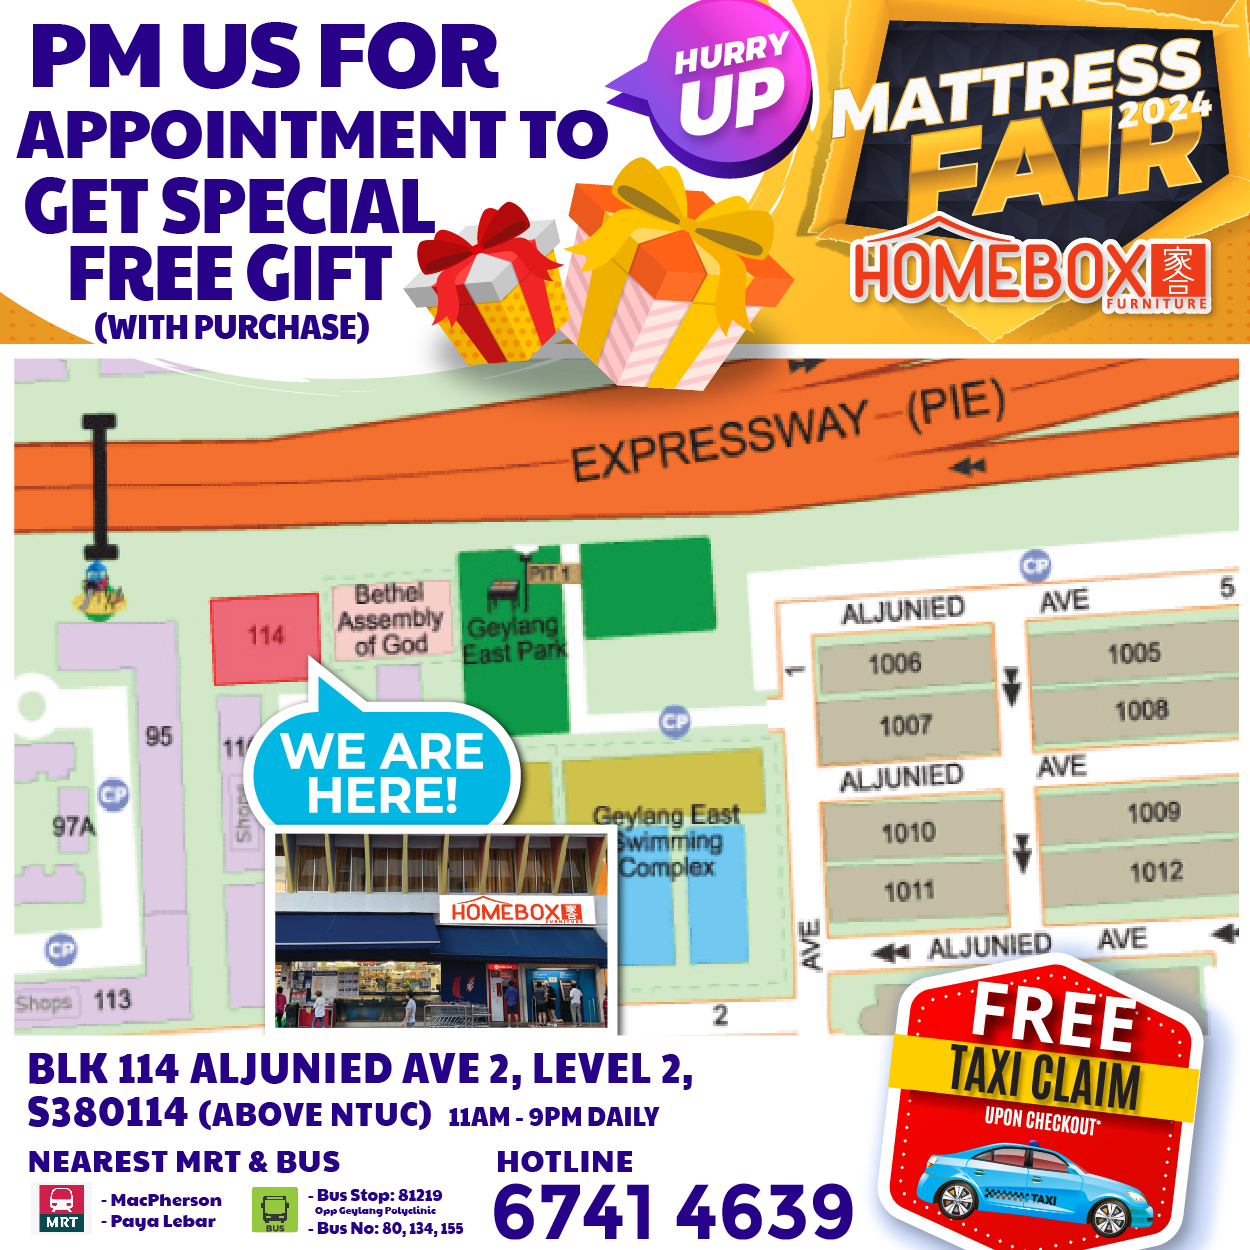 Lobang: Homebox's Biggest Mattress Fair in Aljunied Has Everything At Up To 80% Off From Now Till 5 May 24. Get A Free Mattres Upgrade During The Sale! - 29